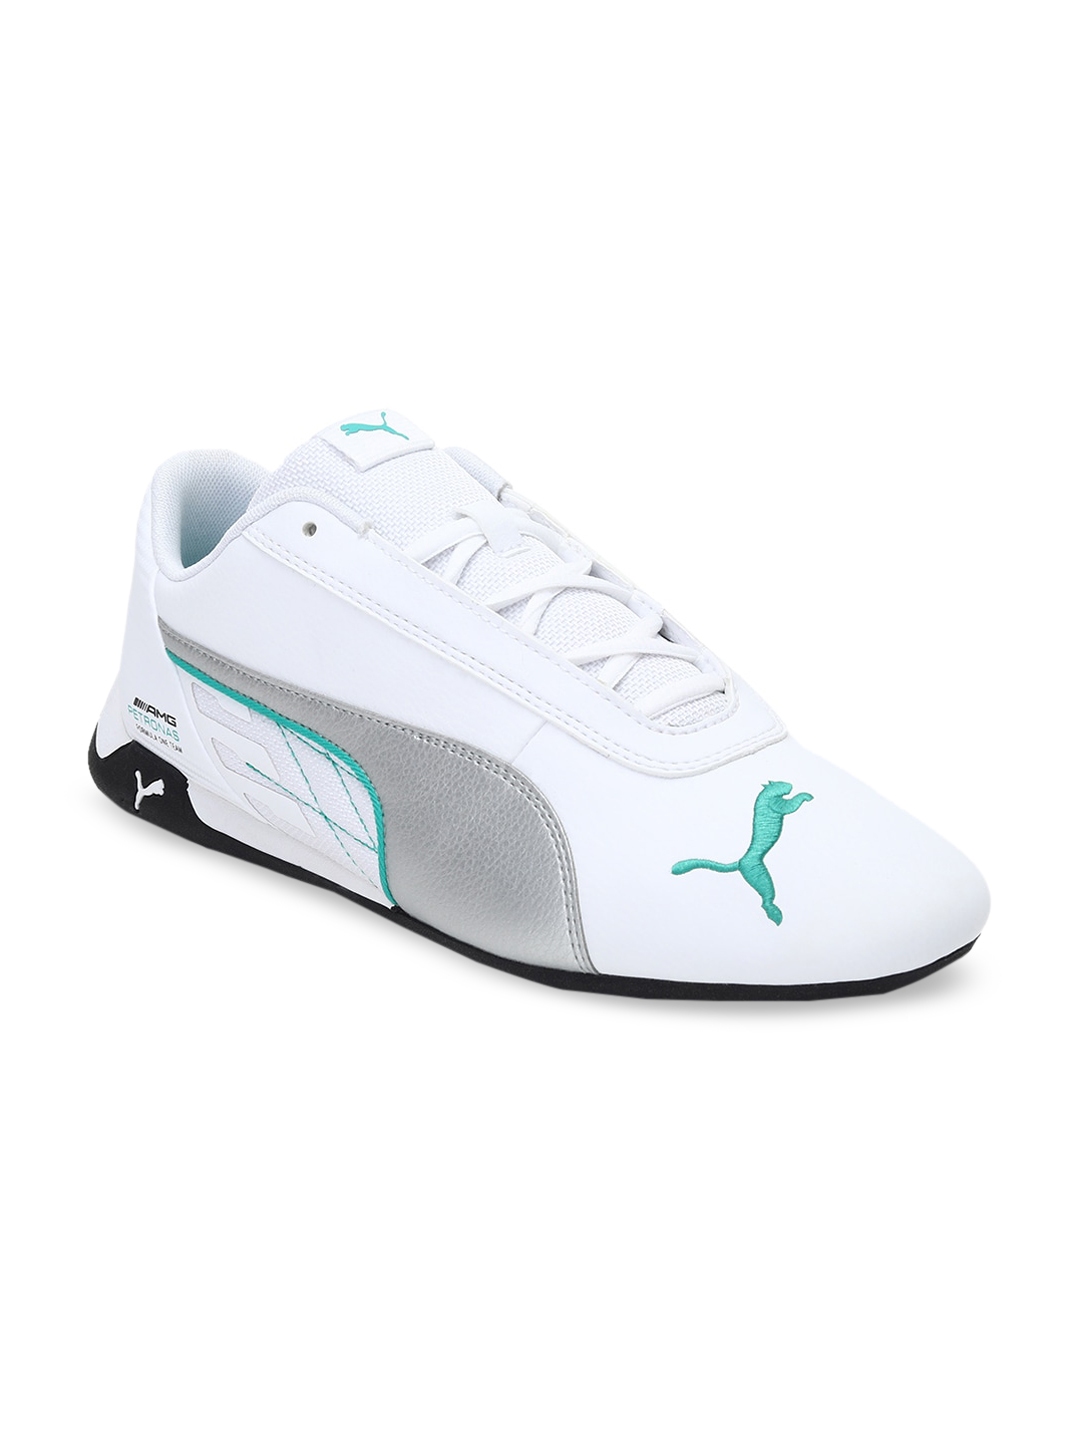 Buy PUMA Motorsport Unisex White MAPM R Cat Driving Shoes - Casual ...